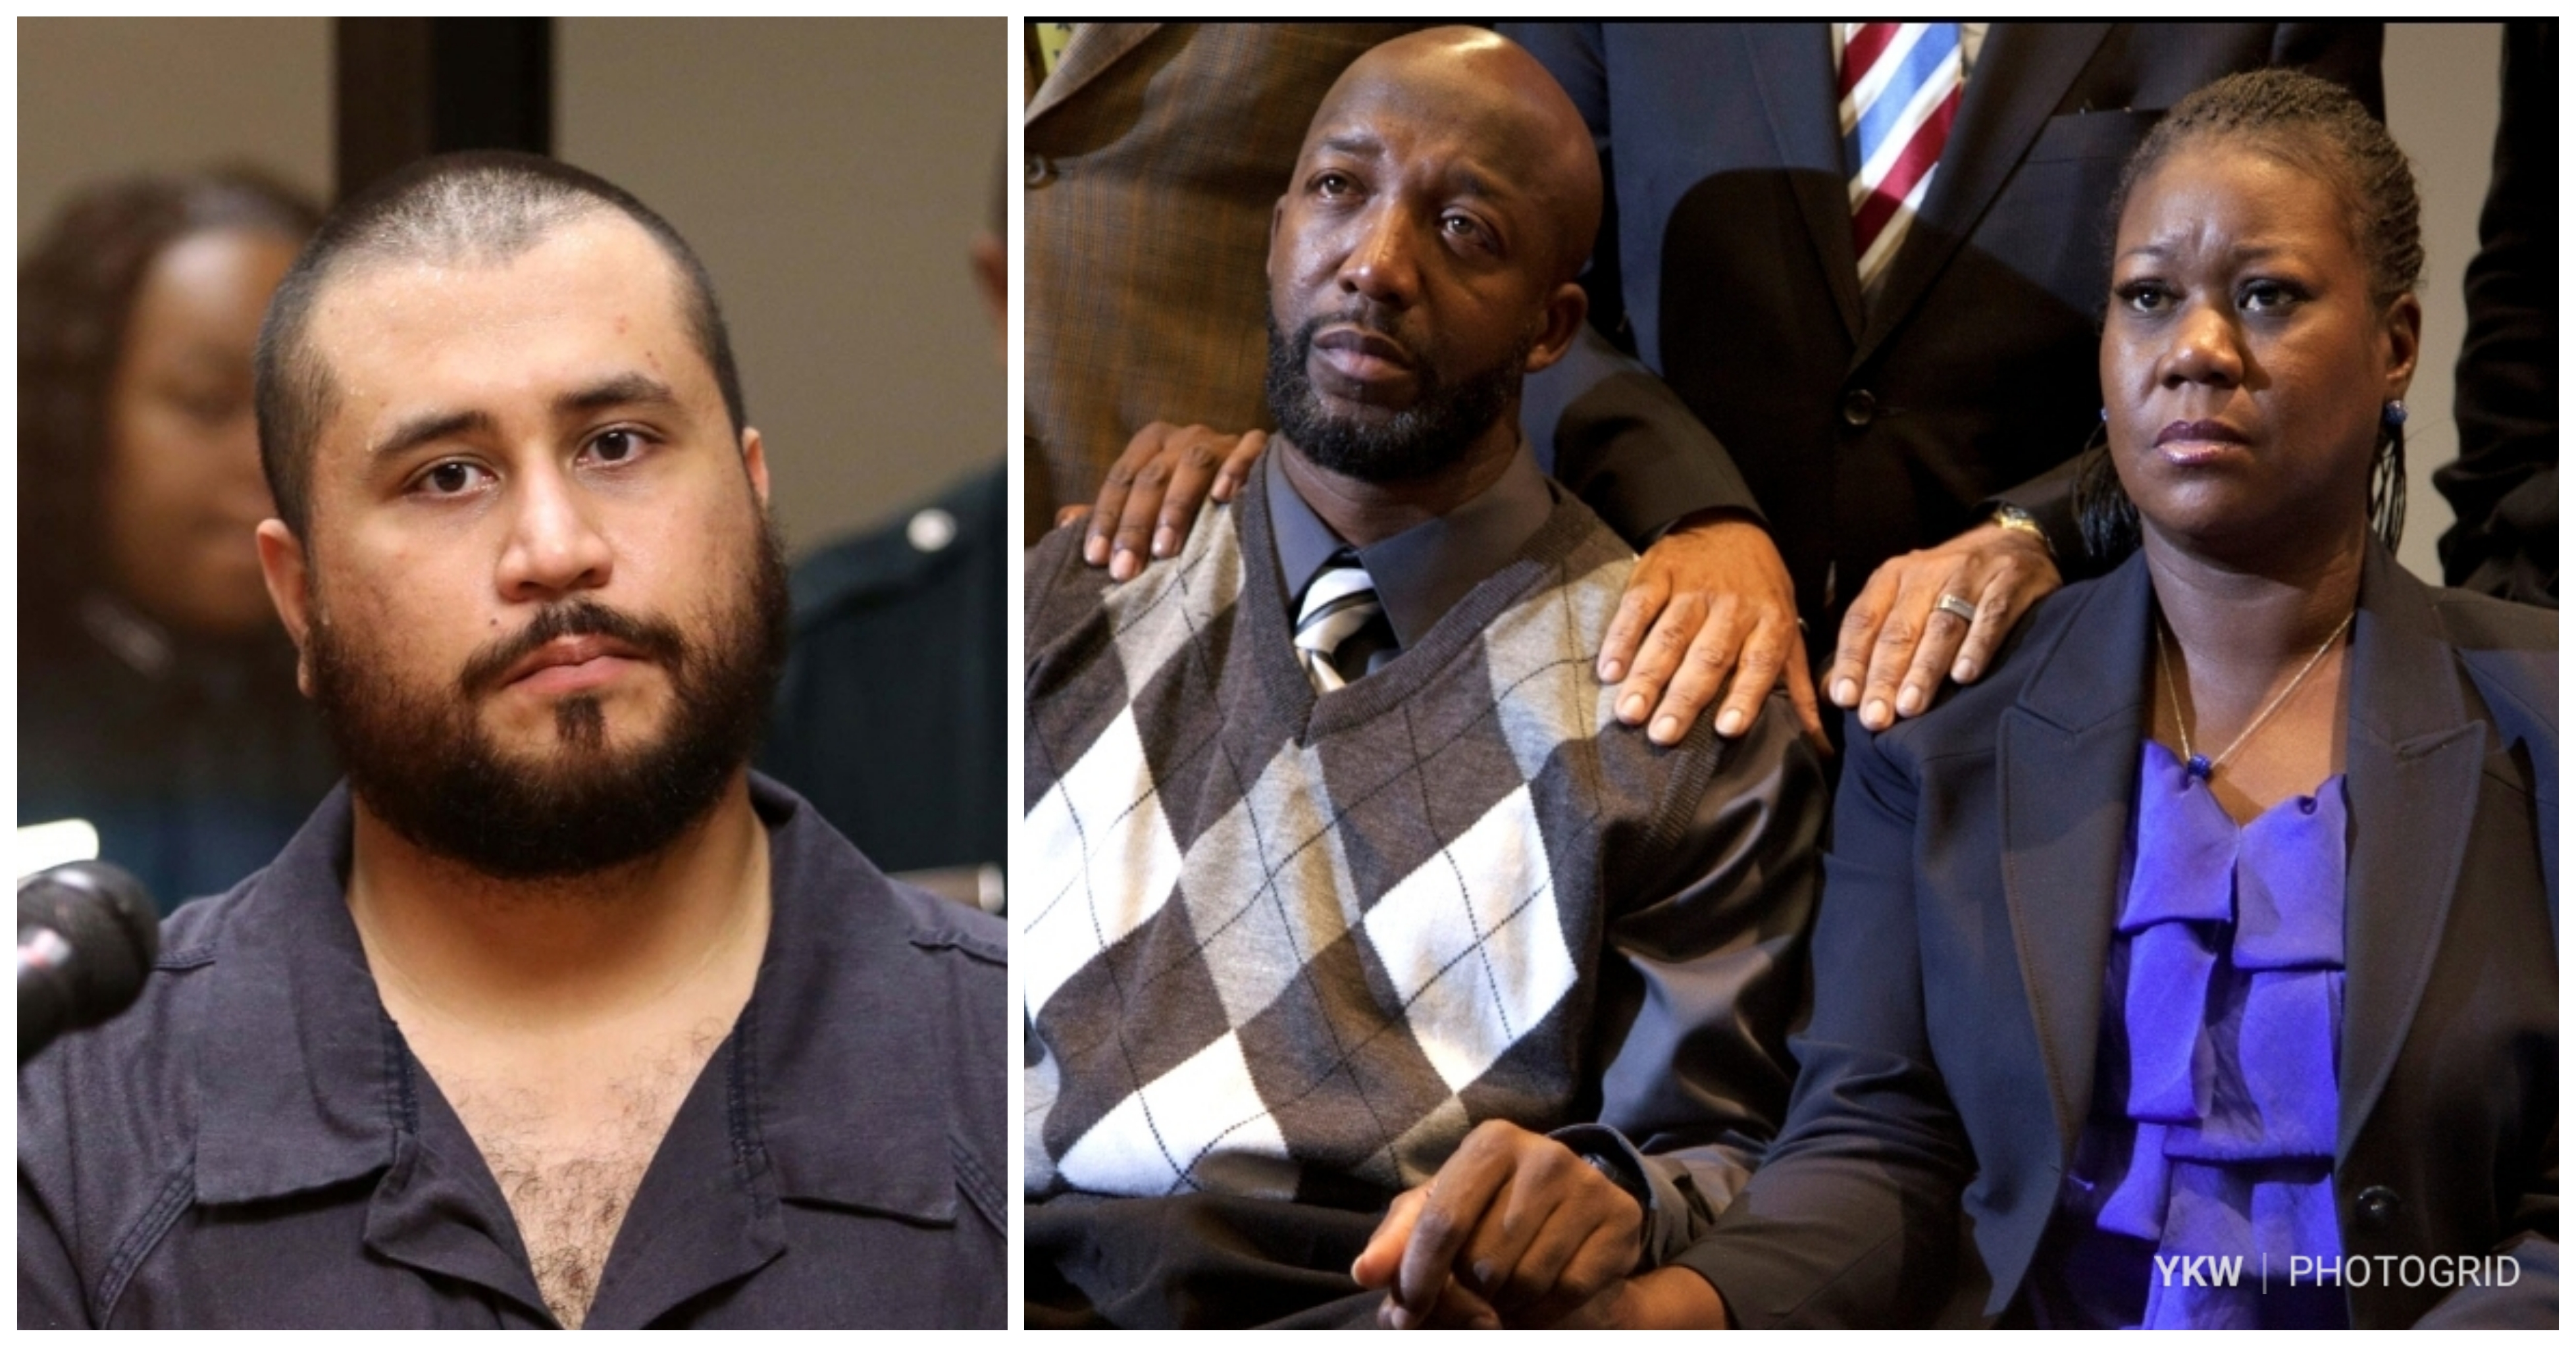 George Zimmerman Sues Trayvon Martin’s Family And Their Attorney For $100 Million